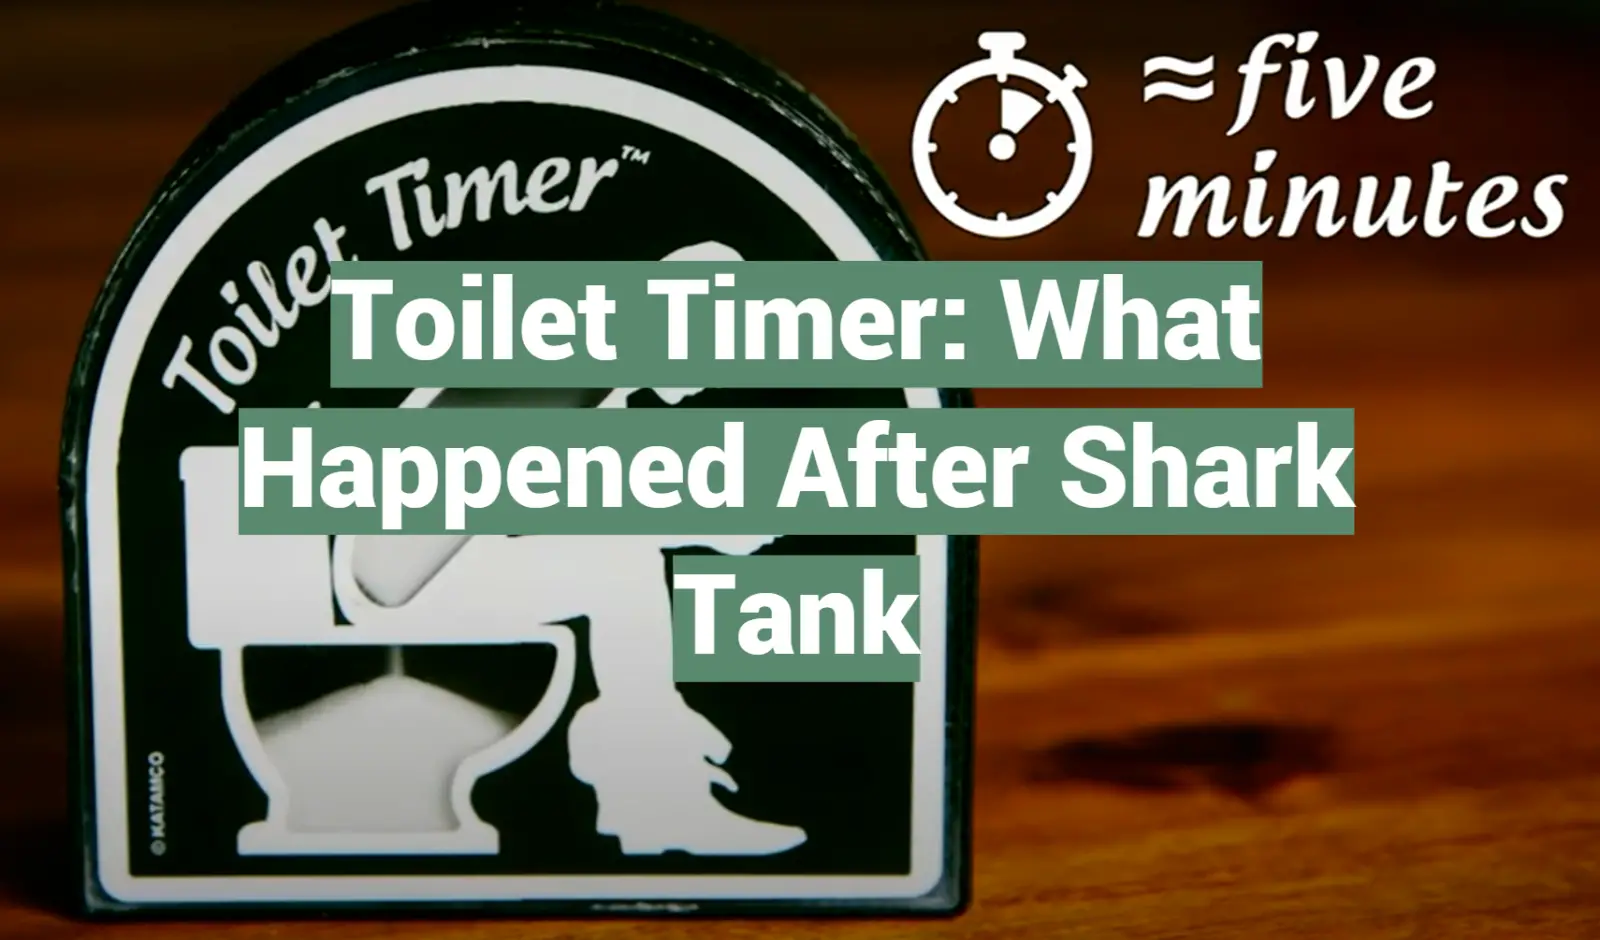 Toilet Timer: What Happened After Shark Tank